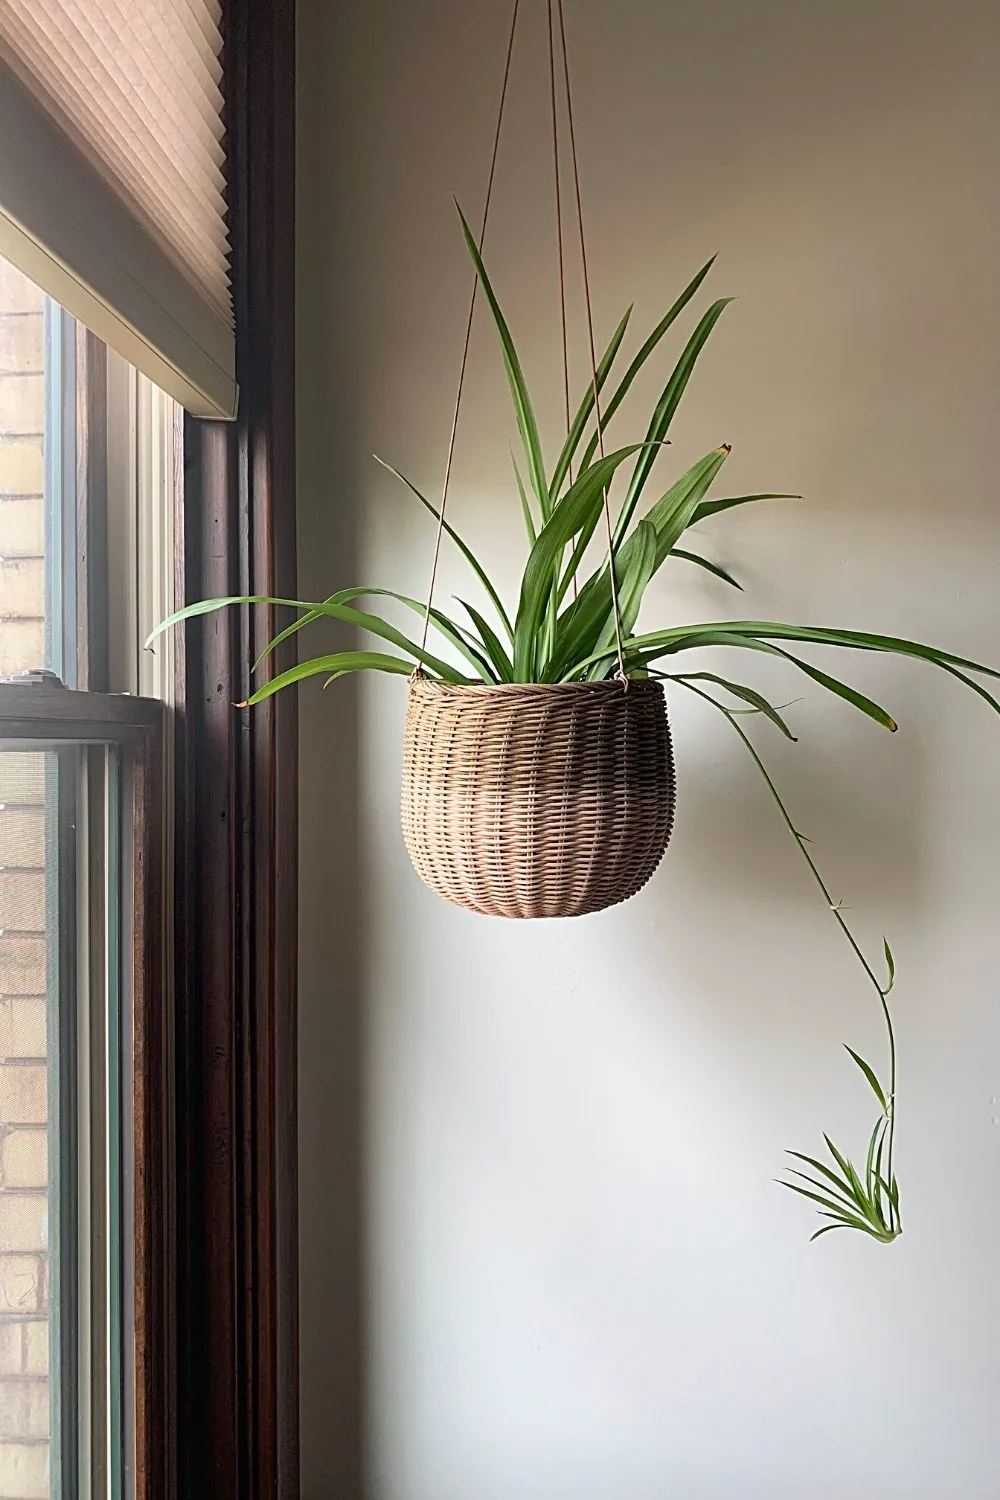 Spider plant looks best when grown in hanging baskets placed near northeast-facing windows